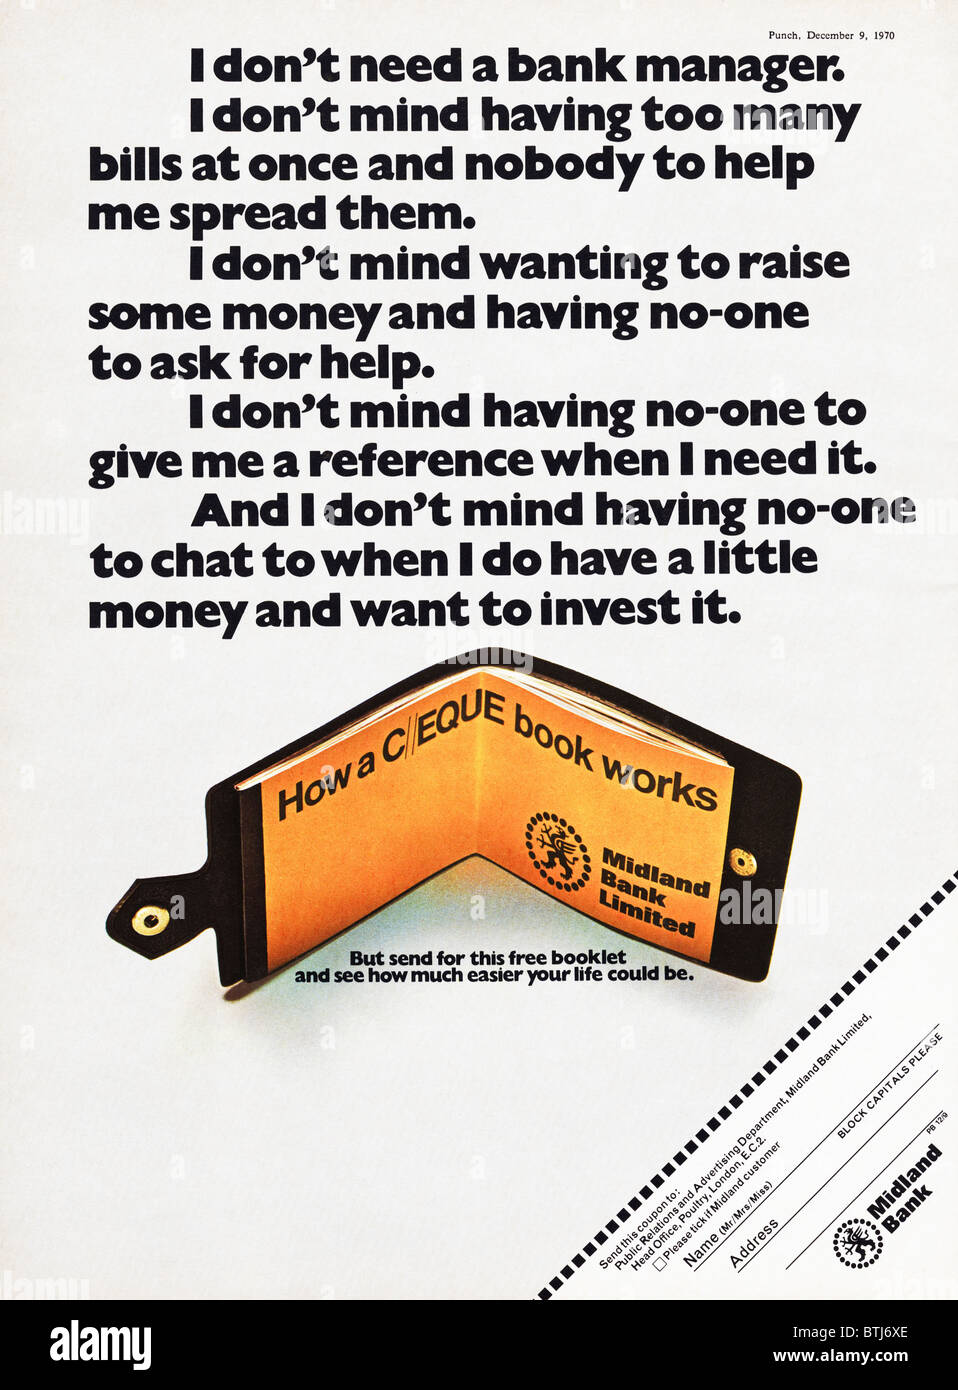 Advertising for Midland Bank on how a cheque book works in magazine circa 1970 Stock Photo